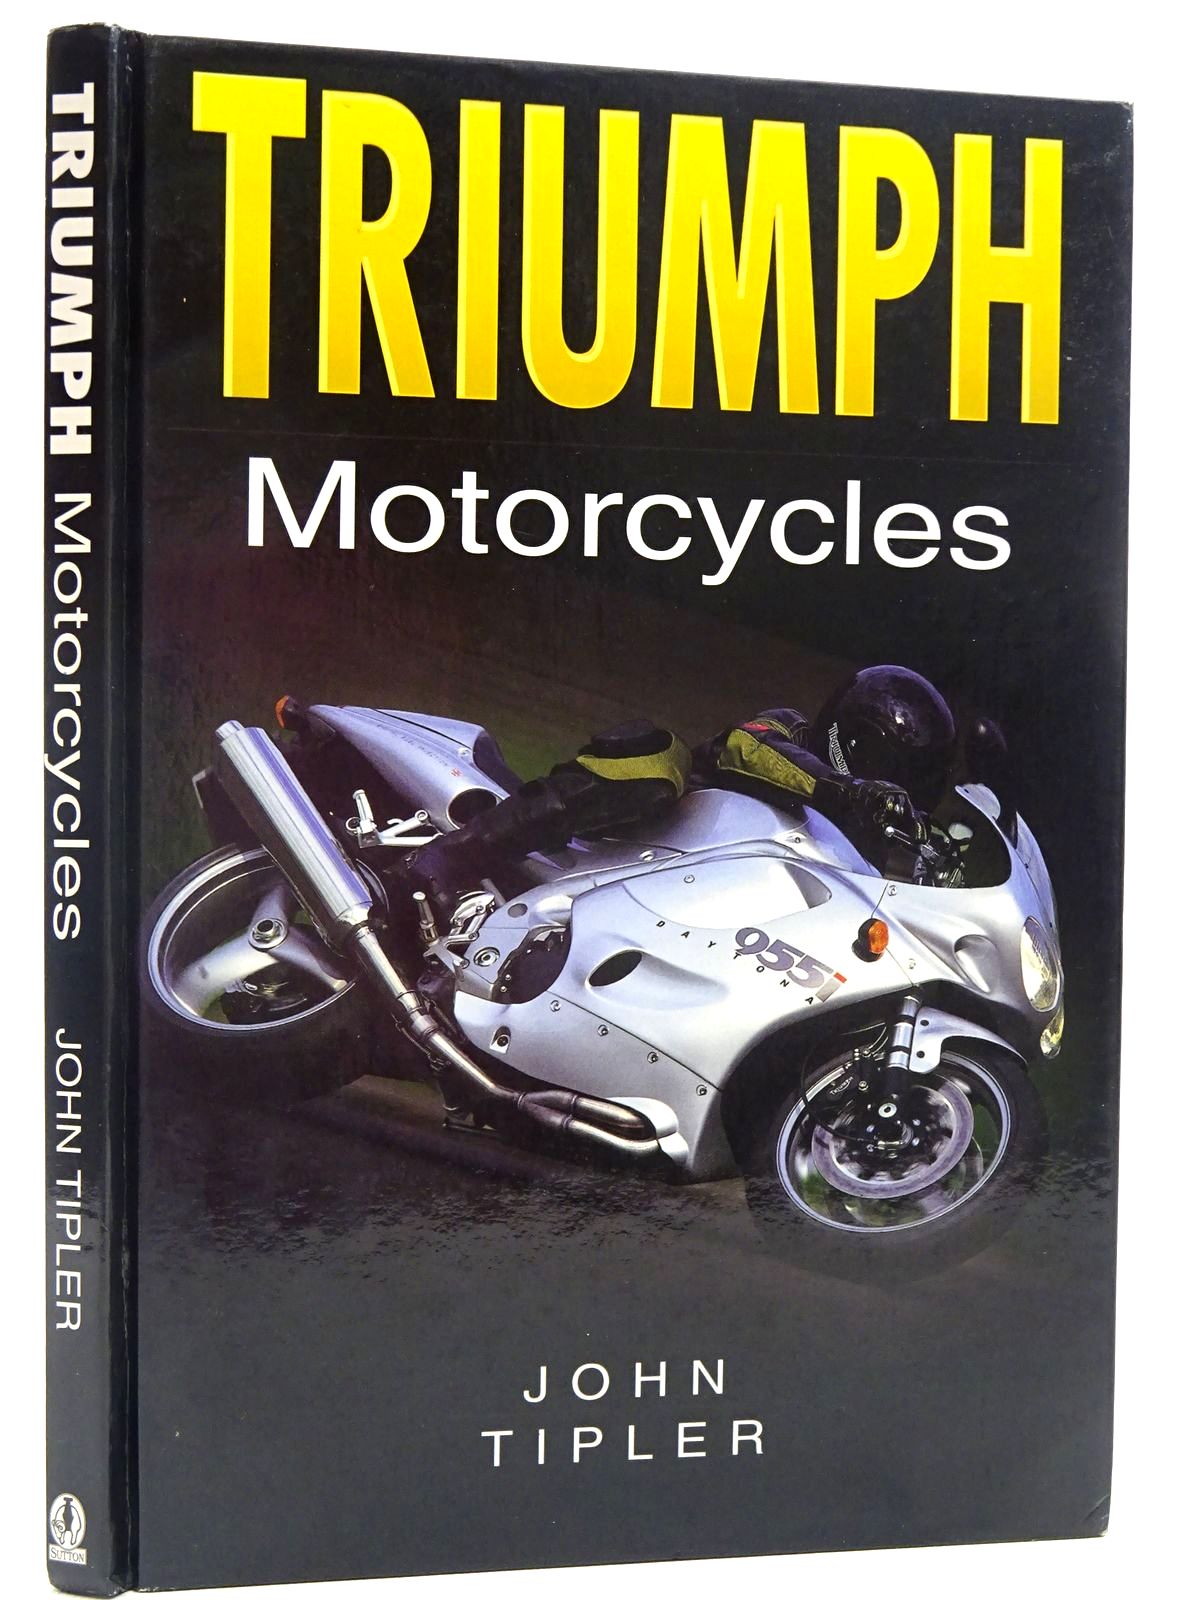 Photo of TRIUMPH MOTORCYCLES written by Tipler, John published by Sutton Publishing (STOCK CODE: 2129040)  for sale by Stella & Rose's Books